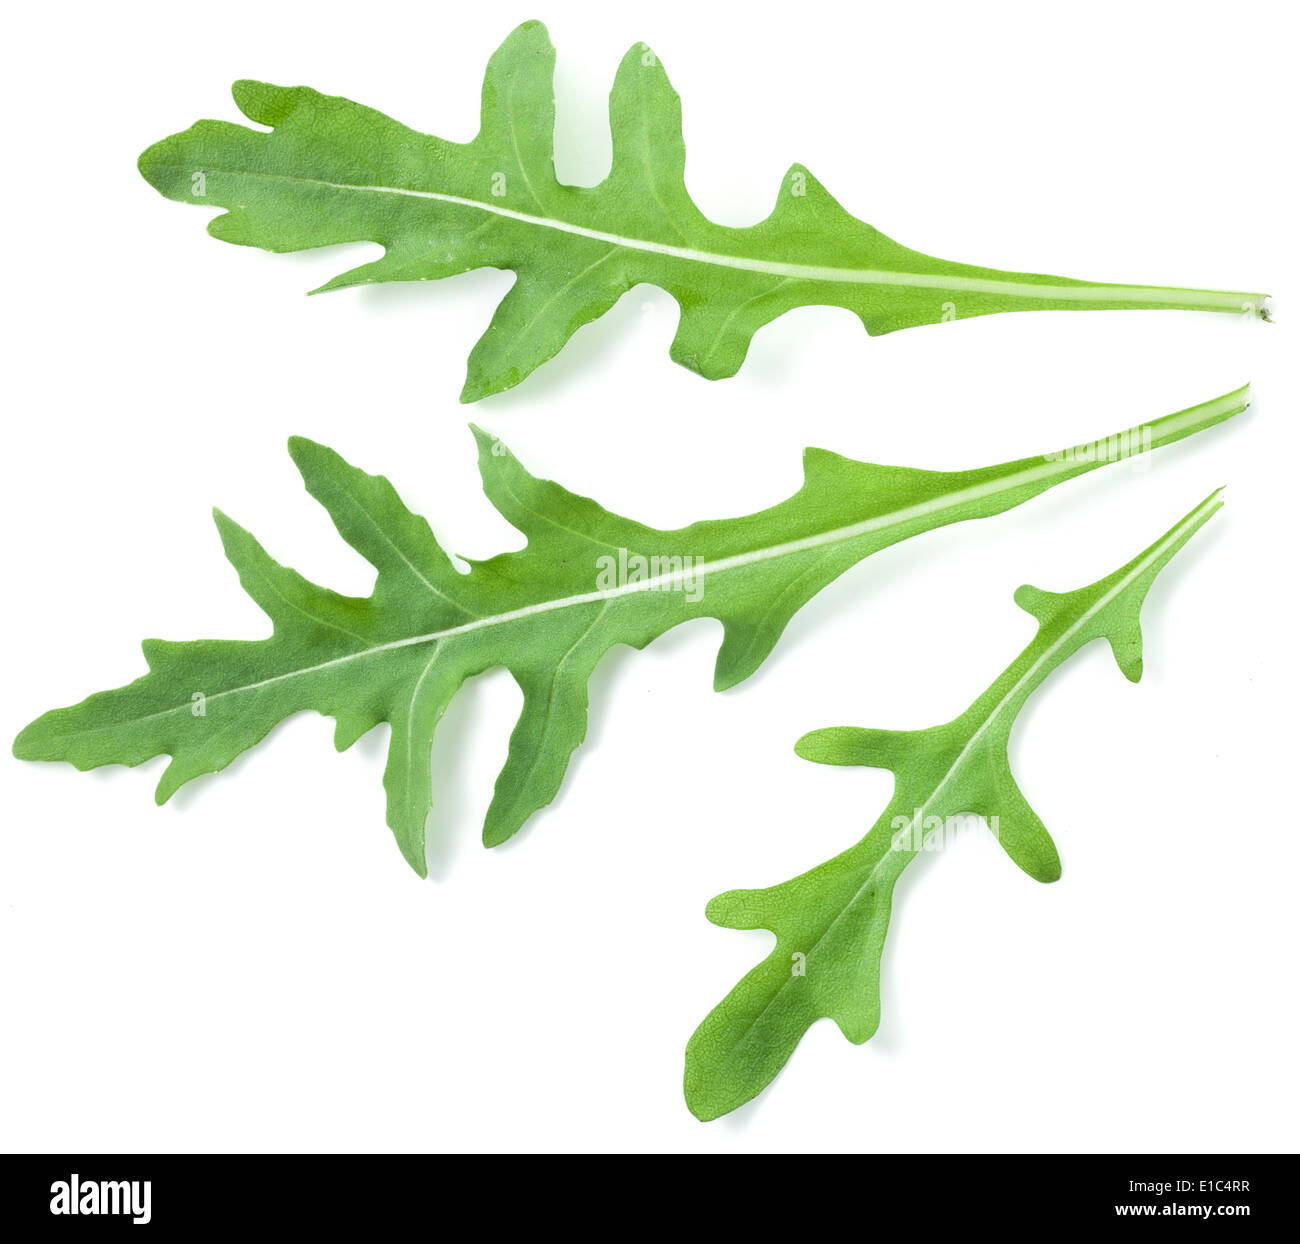 Green arugula leaves isolated on a white background. Stock Photo